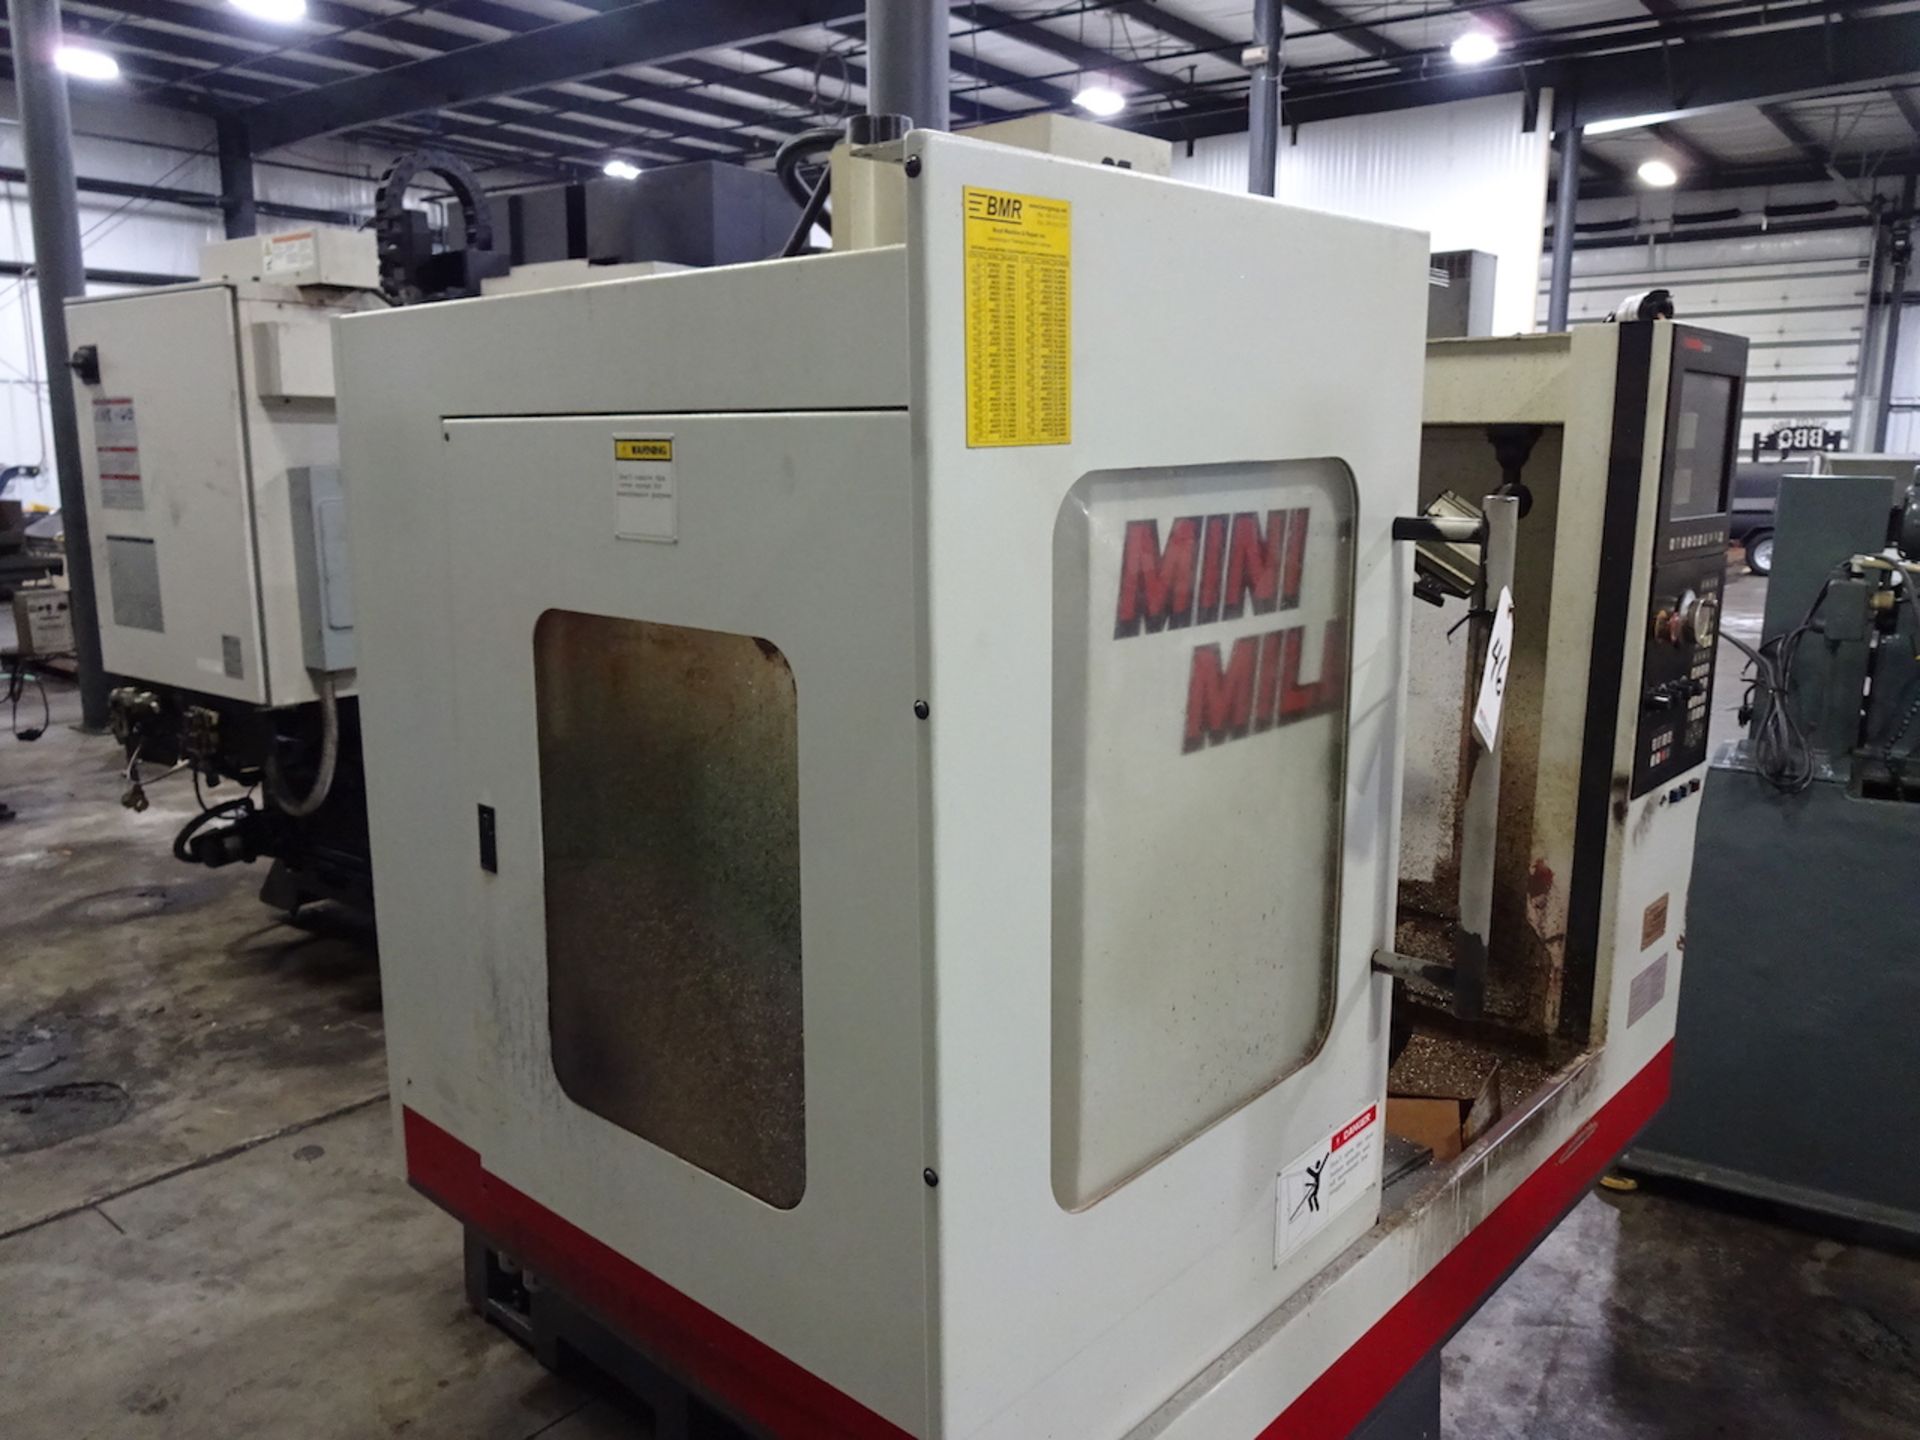 FRYER MODEL MM CNC MINI MILL, S/N 25022, 10 X 33 TABLE, ANILAM 5300M CONTROL (EXCLUDES TRANSFORMER) - Image 5 of 13